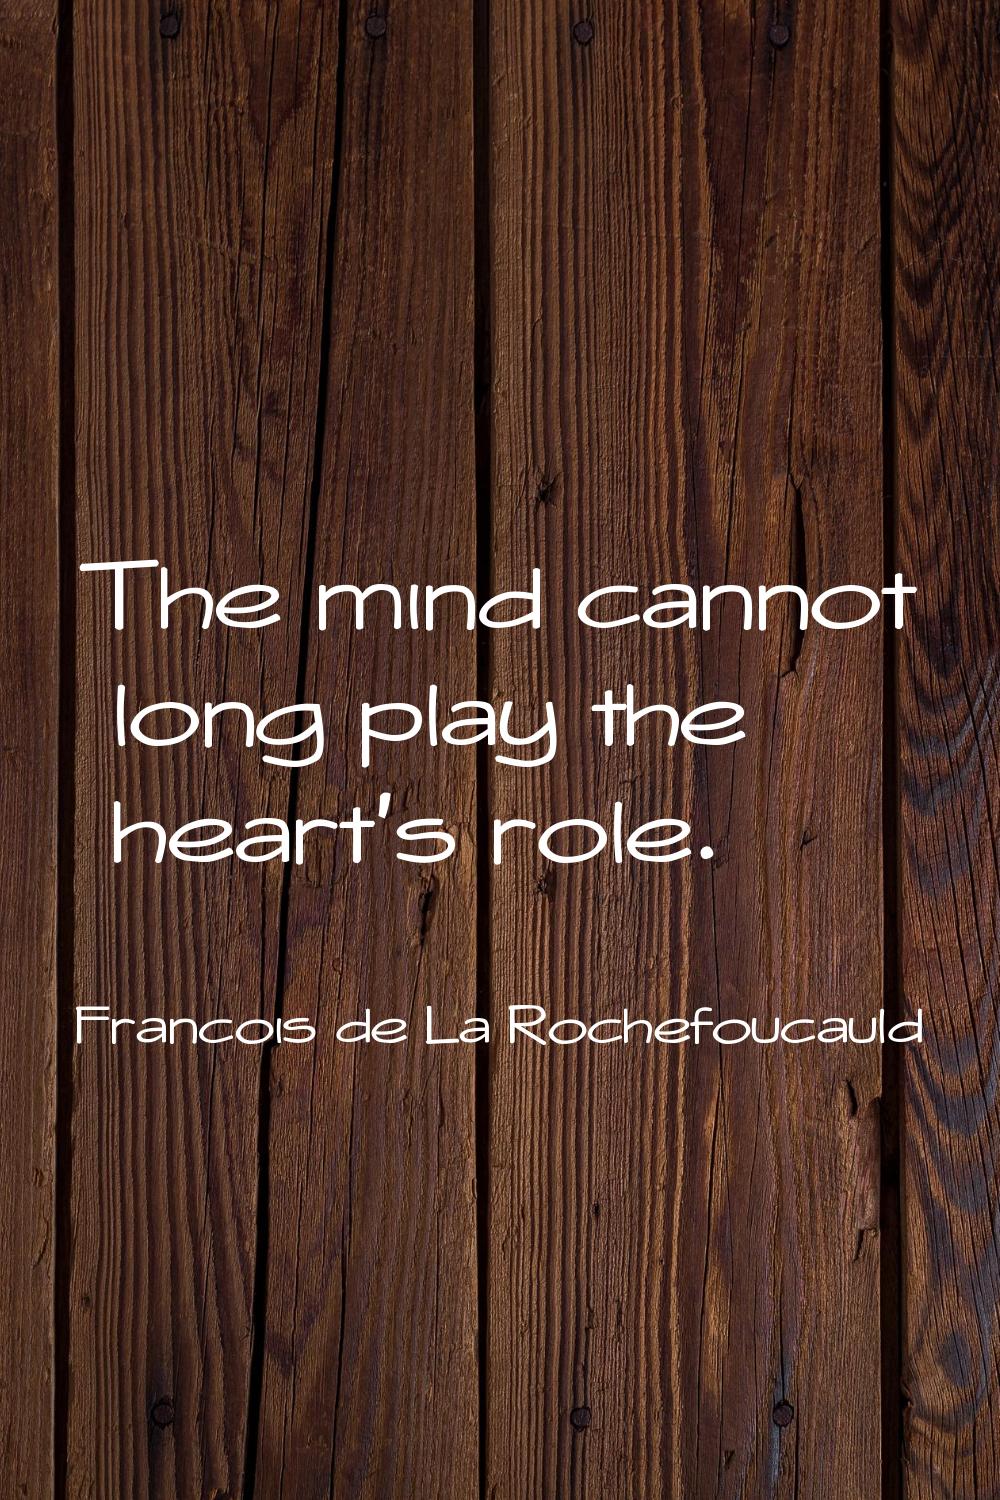 The mind cannot long play the heart's role.